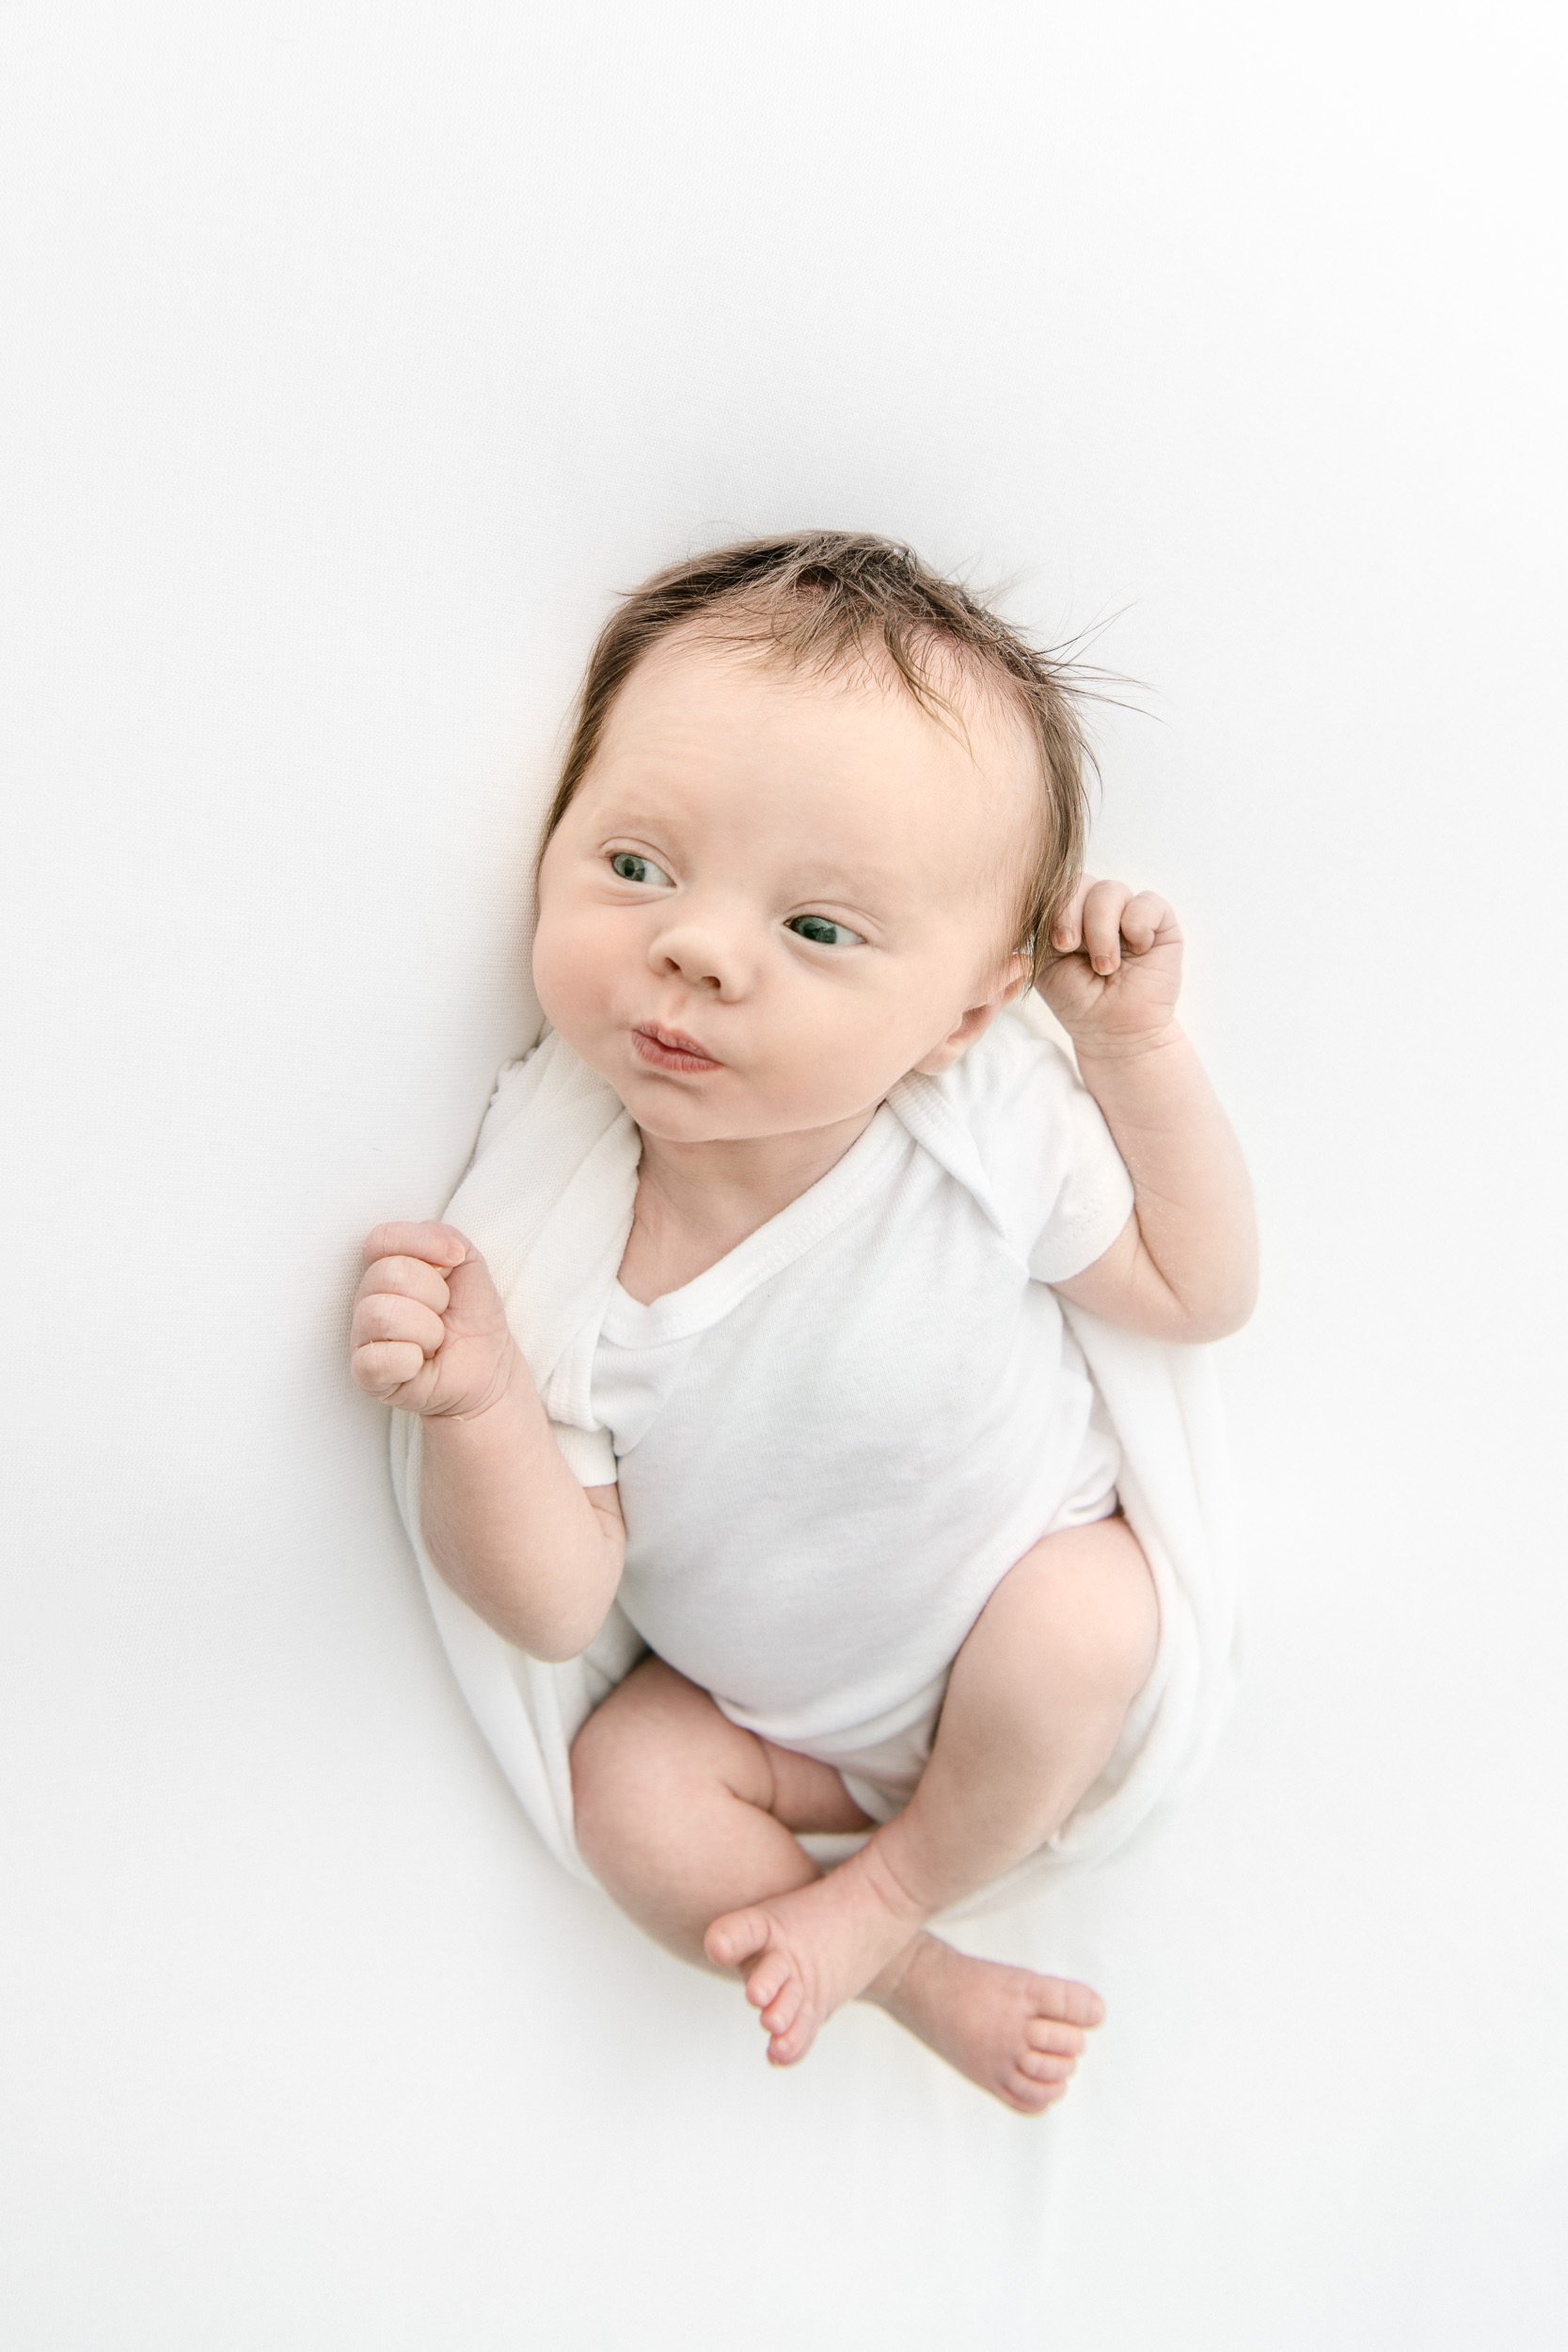  Baby girl with blue eyes and brown hair awake during a studio newborn session in New Jersey by Nicole Hawkins Photography. awake baby #NicoleHawkinsPhotography #NicoleHawkinsNewborns #StudioPhotography #NewYorkPhotographer #NJphotographers #newborn 